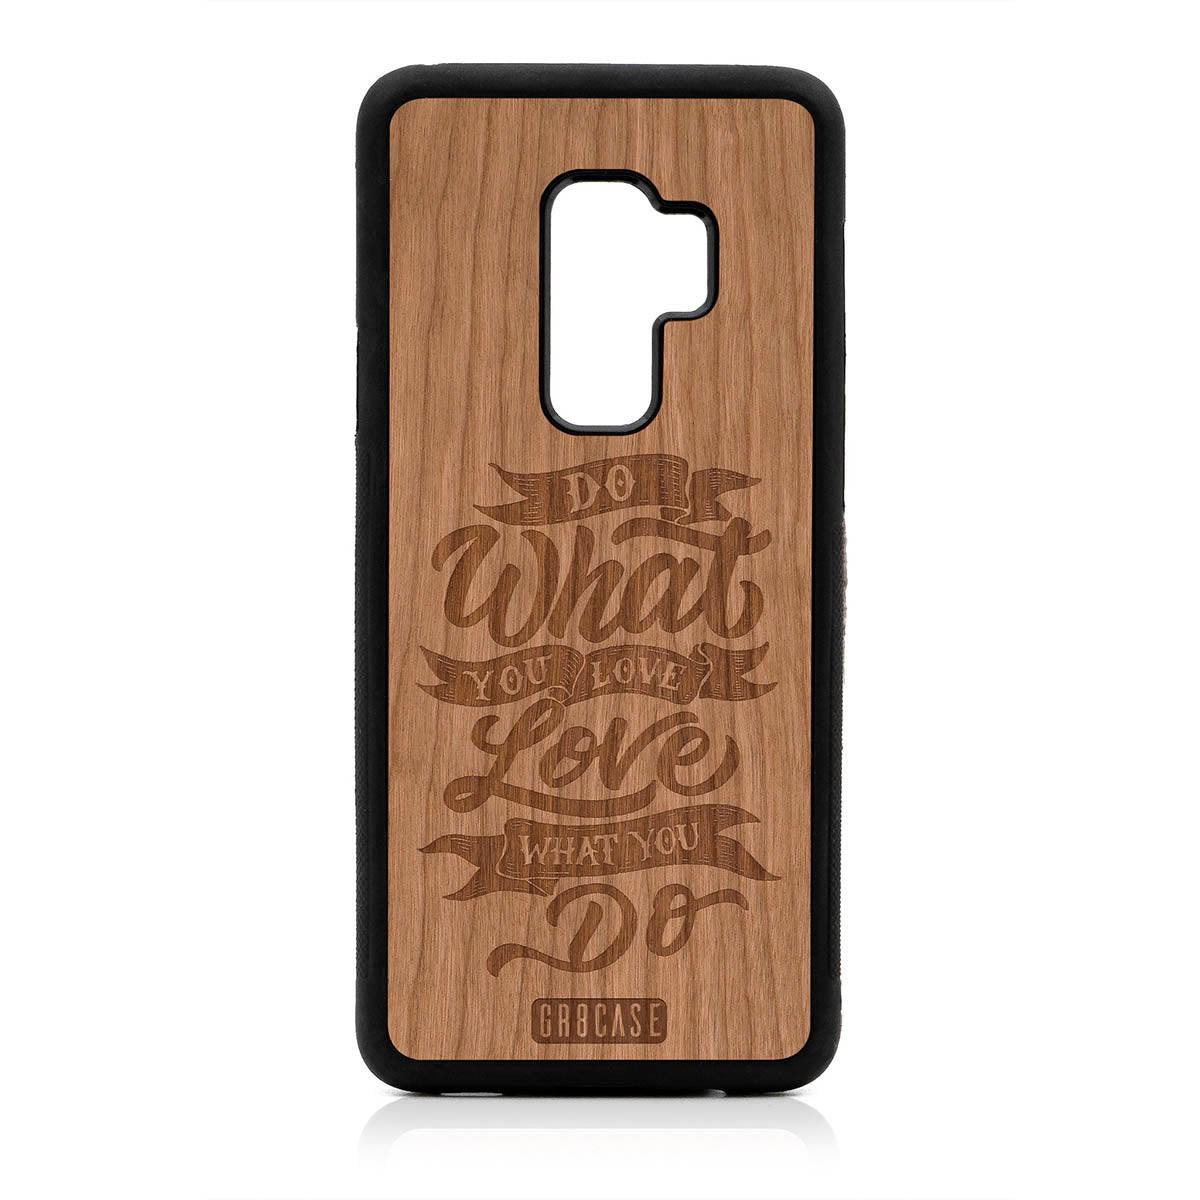 Do What You Love Love What You Do Design Wood Case For Samsung Galaxy S9 Plus by GR8CASE